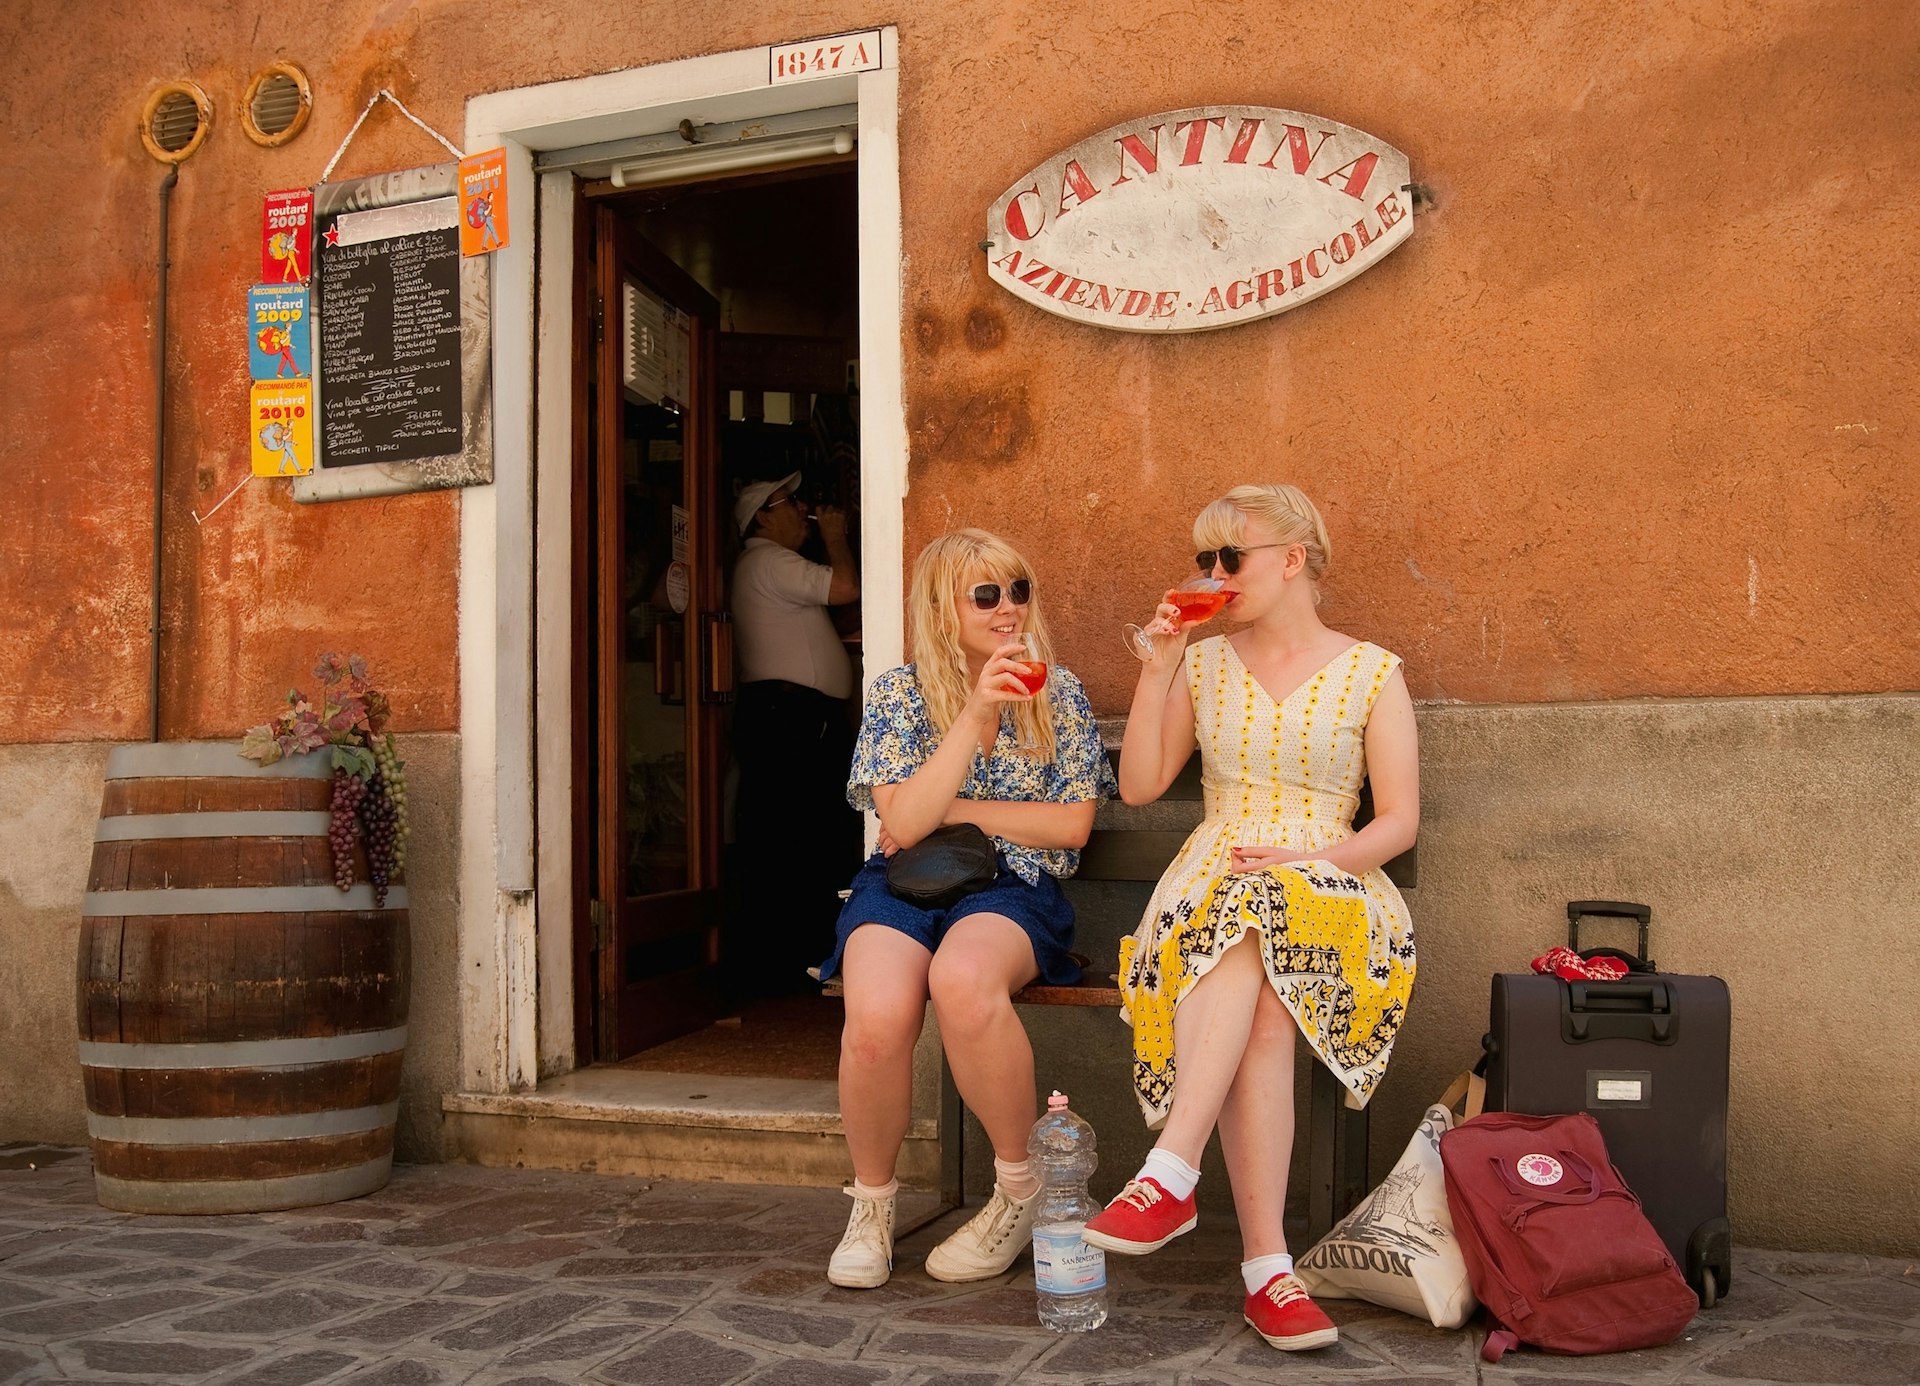 Two girls enjoy a Spritz outside a traditional bacaro. Image by Marco Secchi/Getty Images